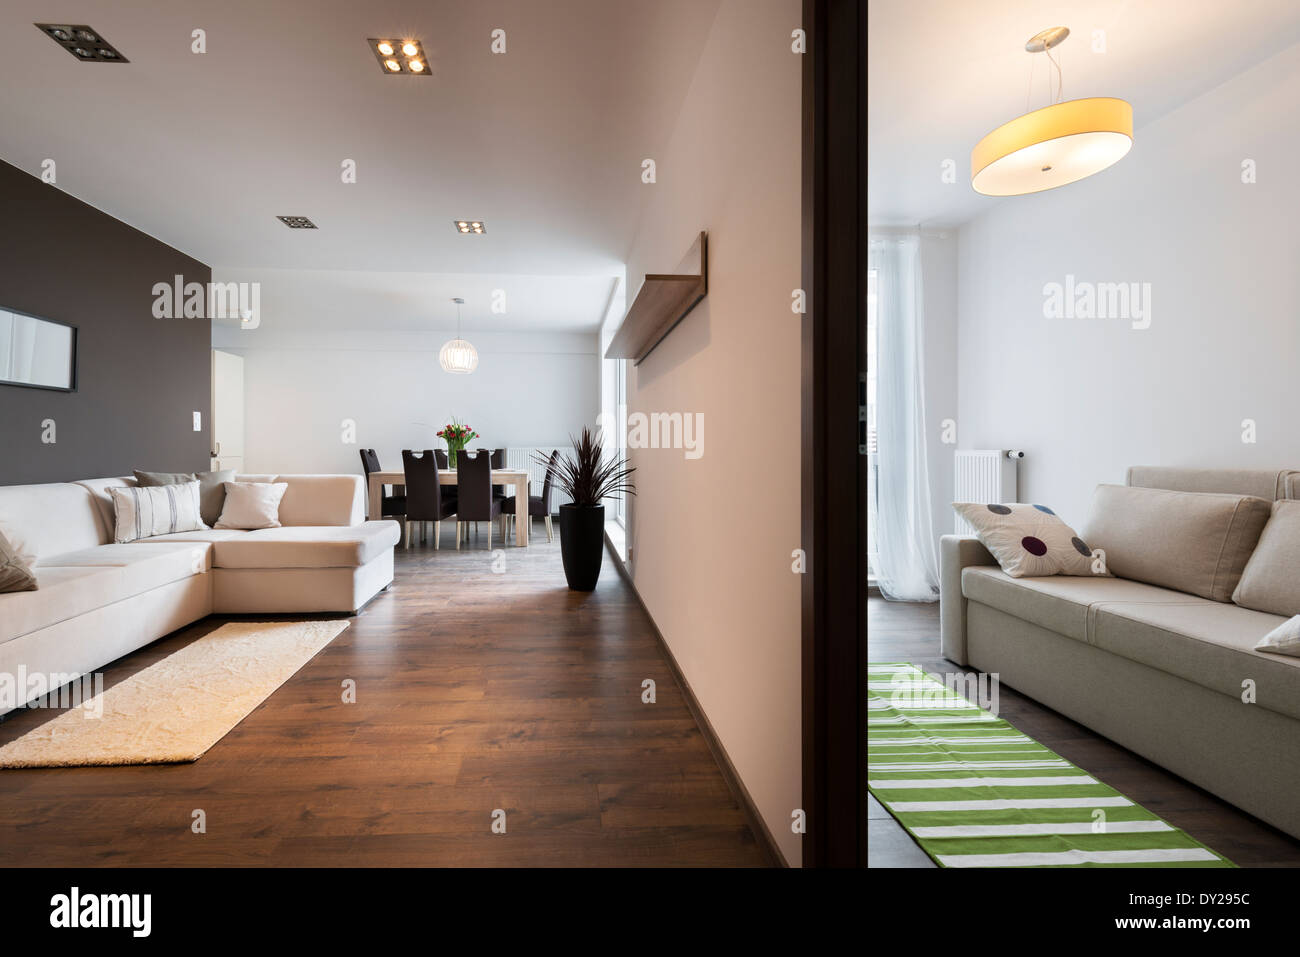 Two Modern Design Rooms In Mansion Stock Photo 68277928 Alamy